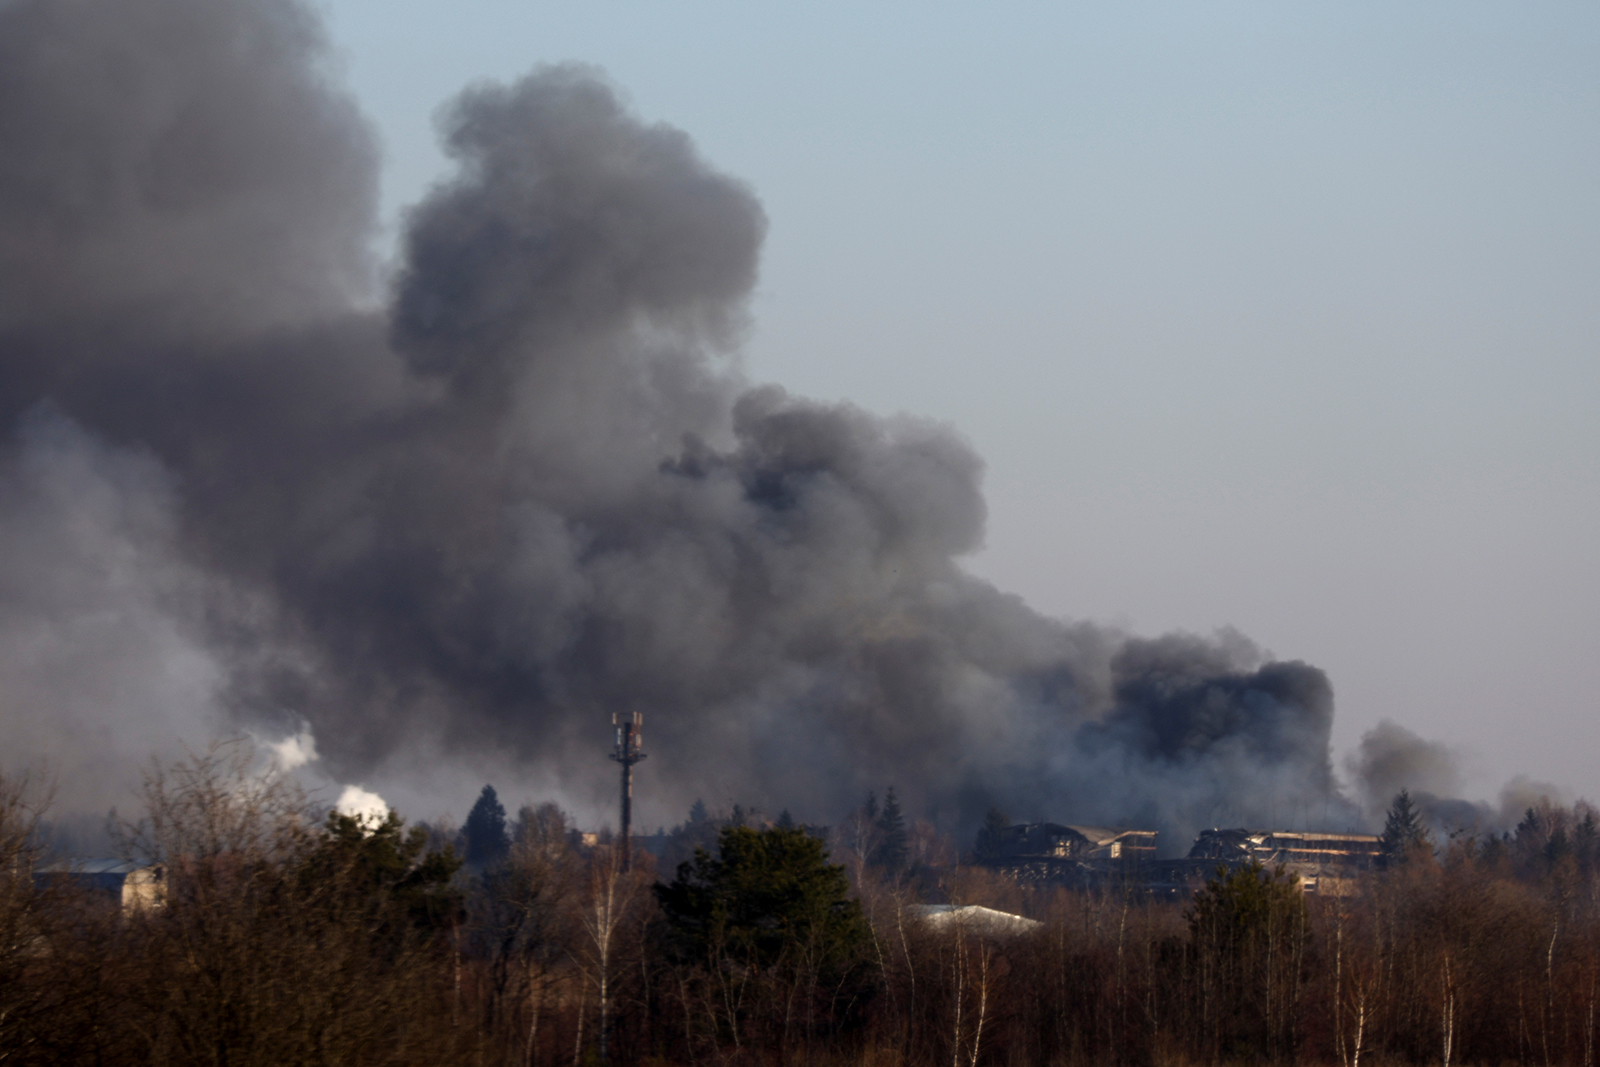 Smoke rises from a factory building near the airport in Lviv, Ukraine, on March 18.